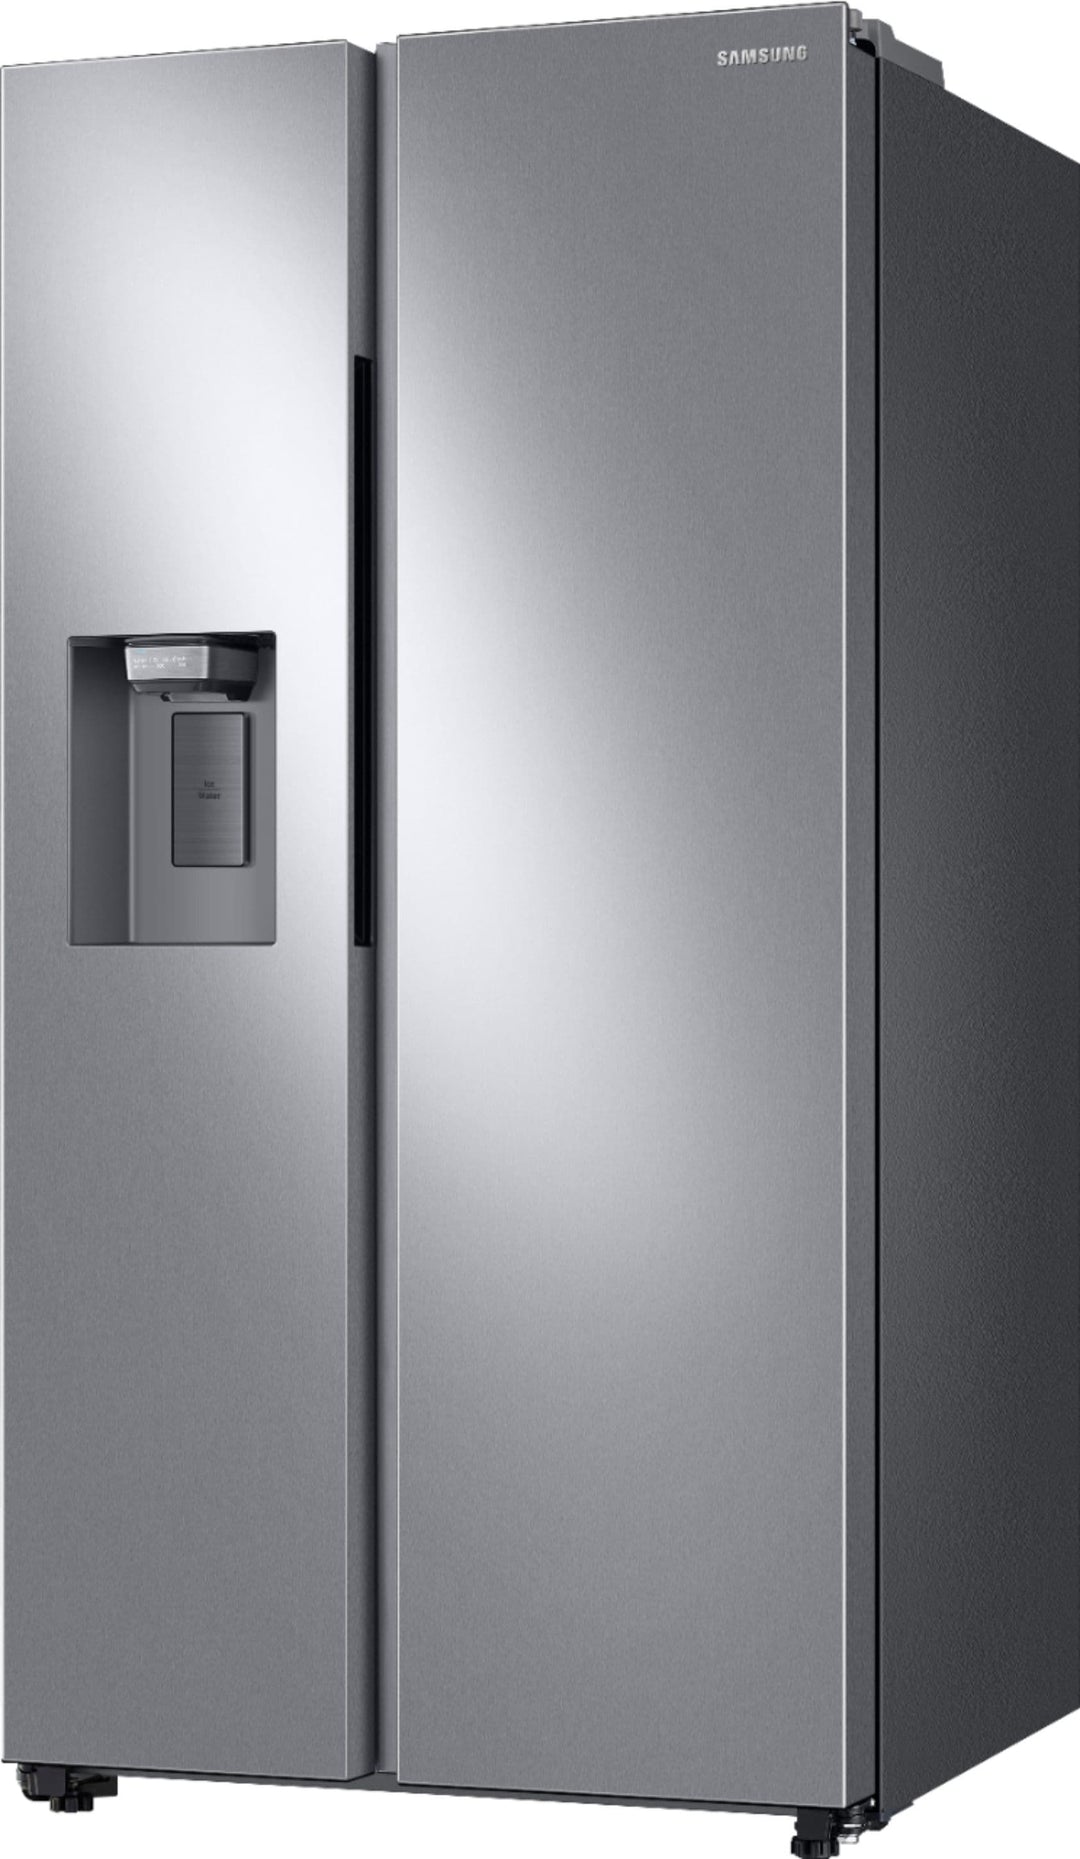 Samsung - 27.4 Cu. Ft. Side-by-Side Refrigerator - Stainless steel_7